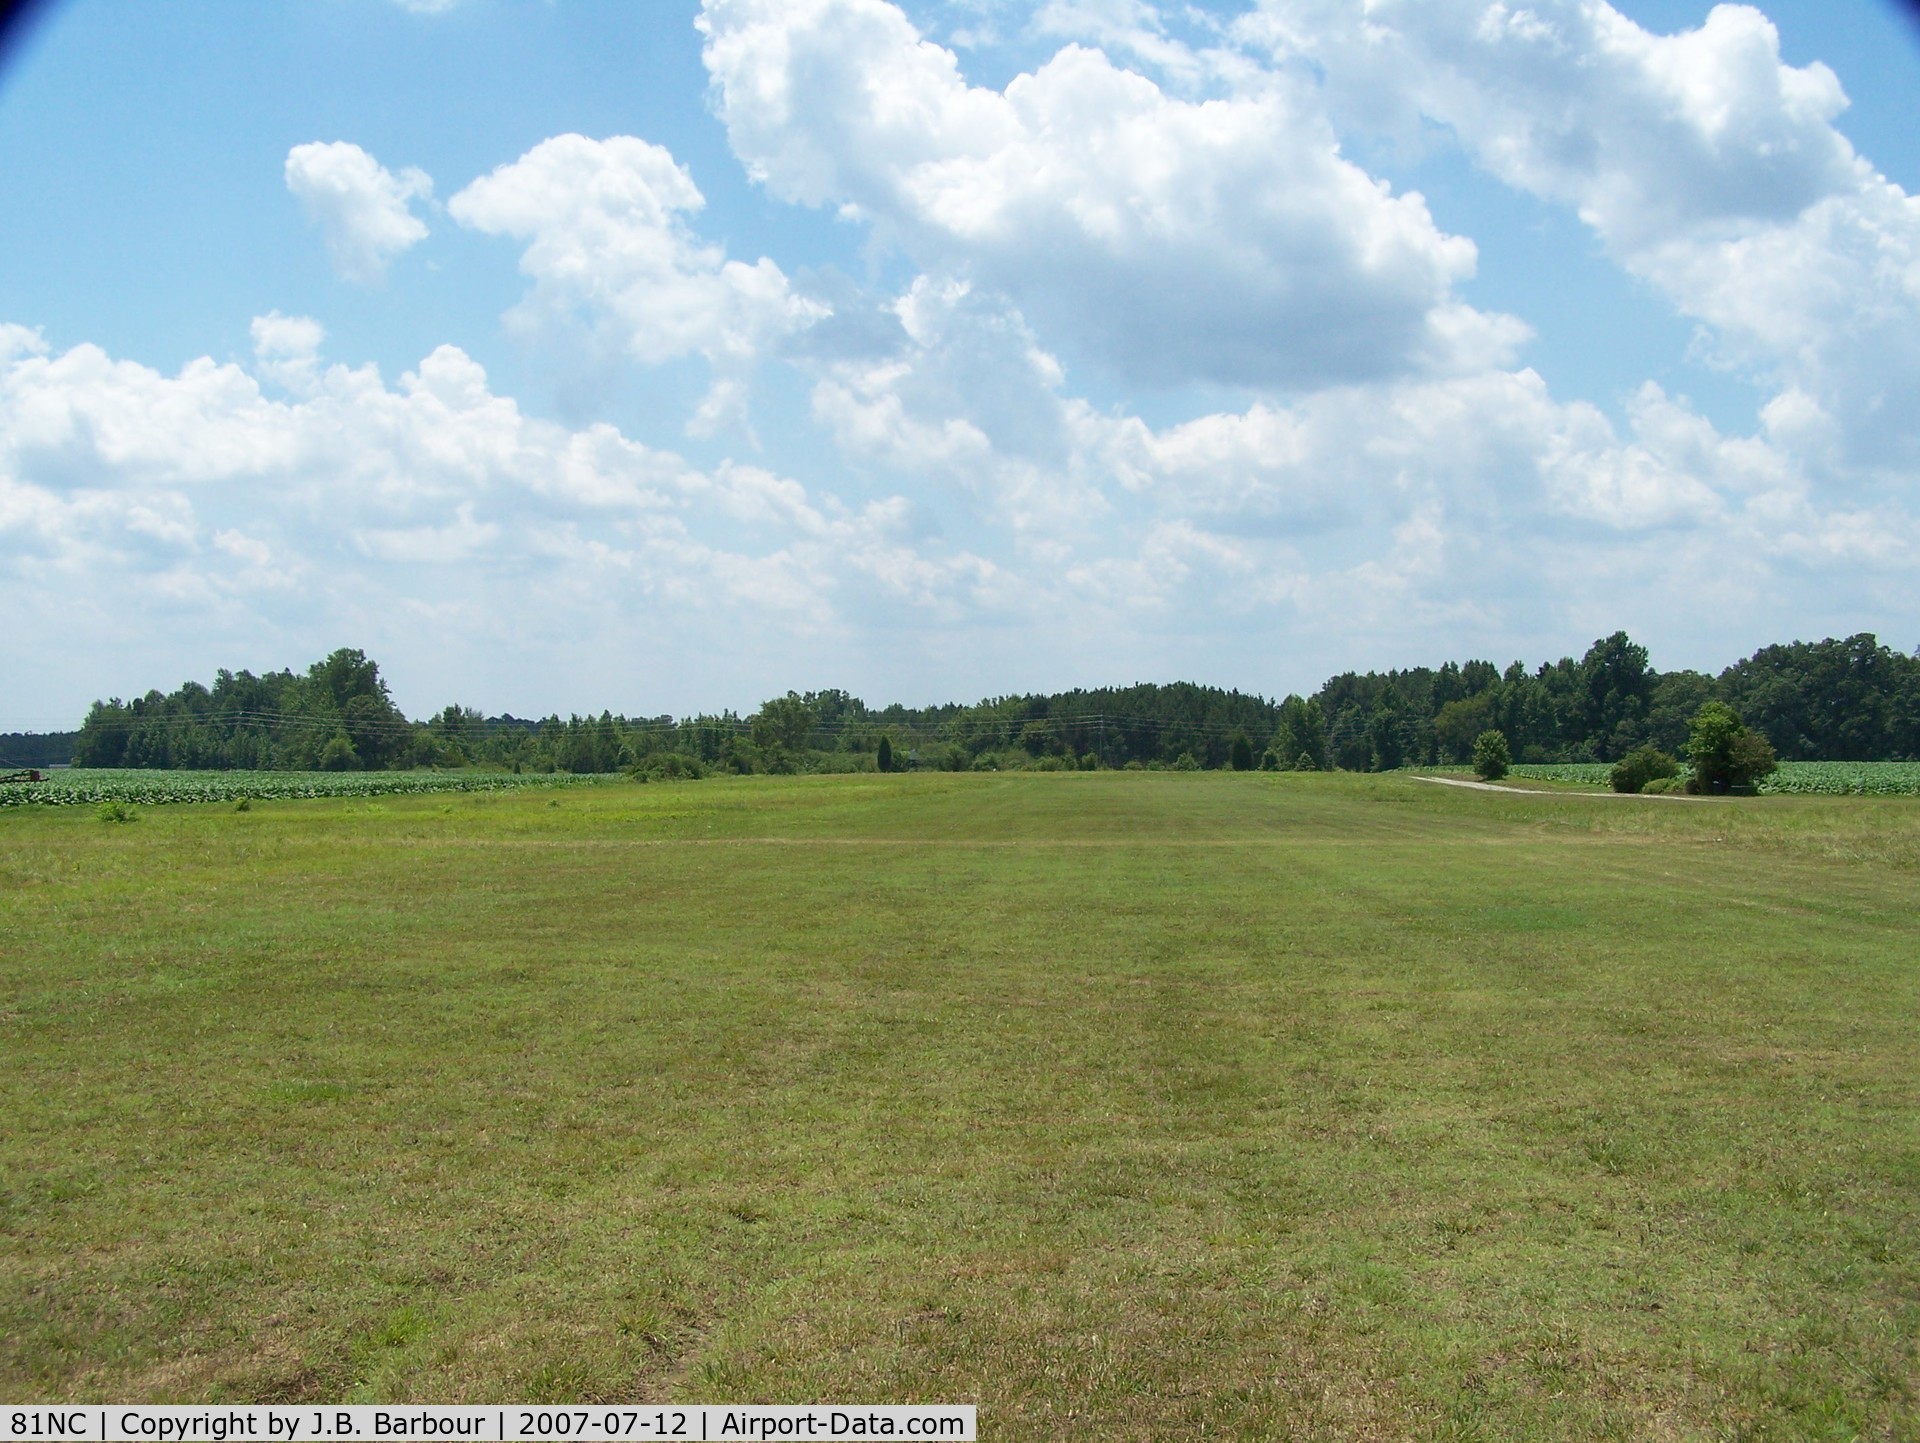 Cox Field Airport (81NC) - Nothing here but a turf pad surrounded by fields